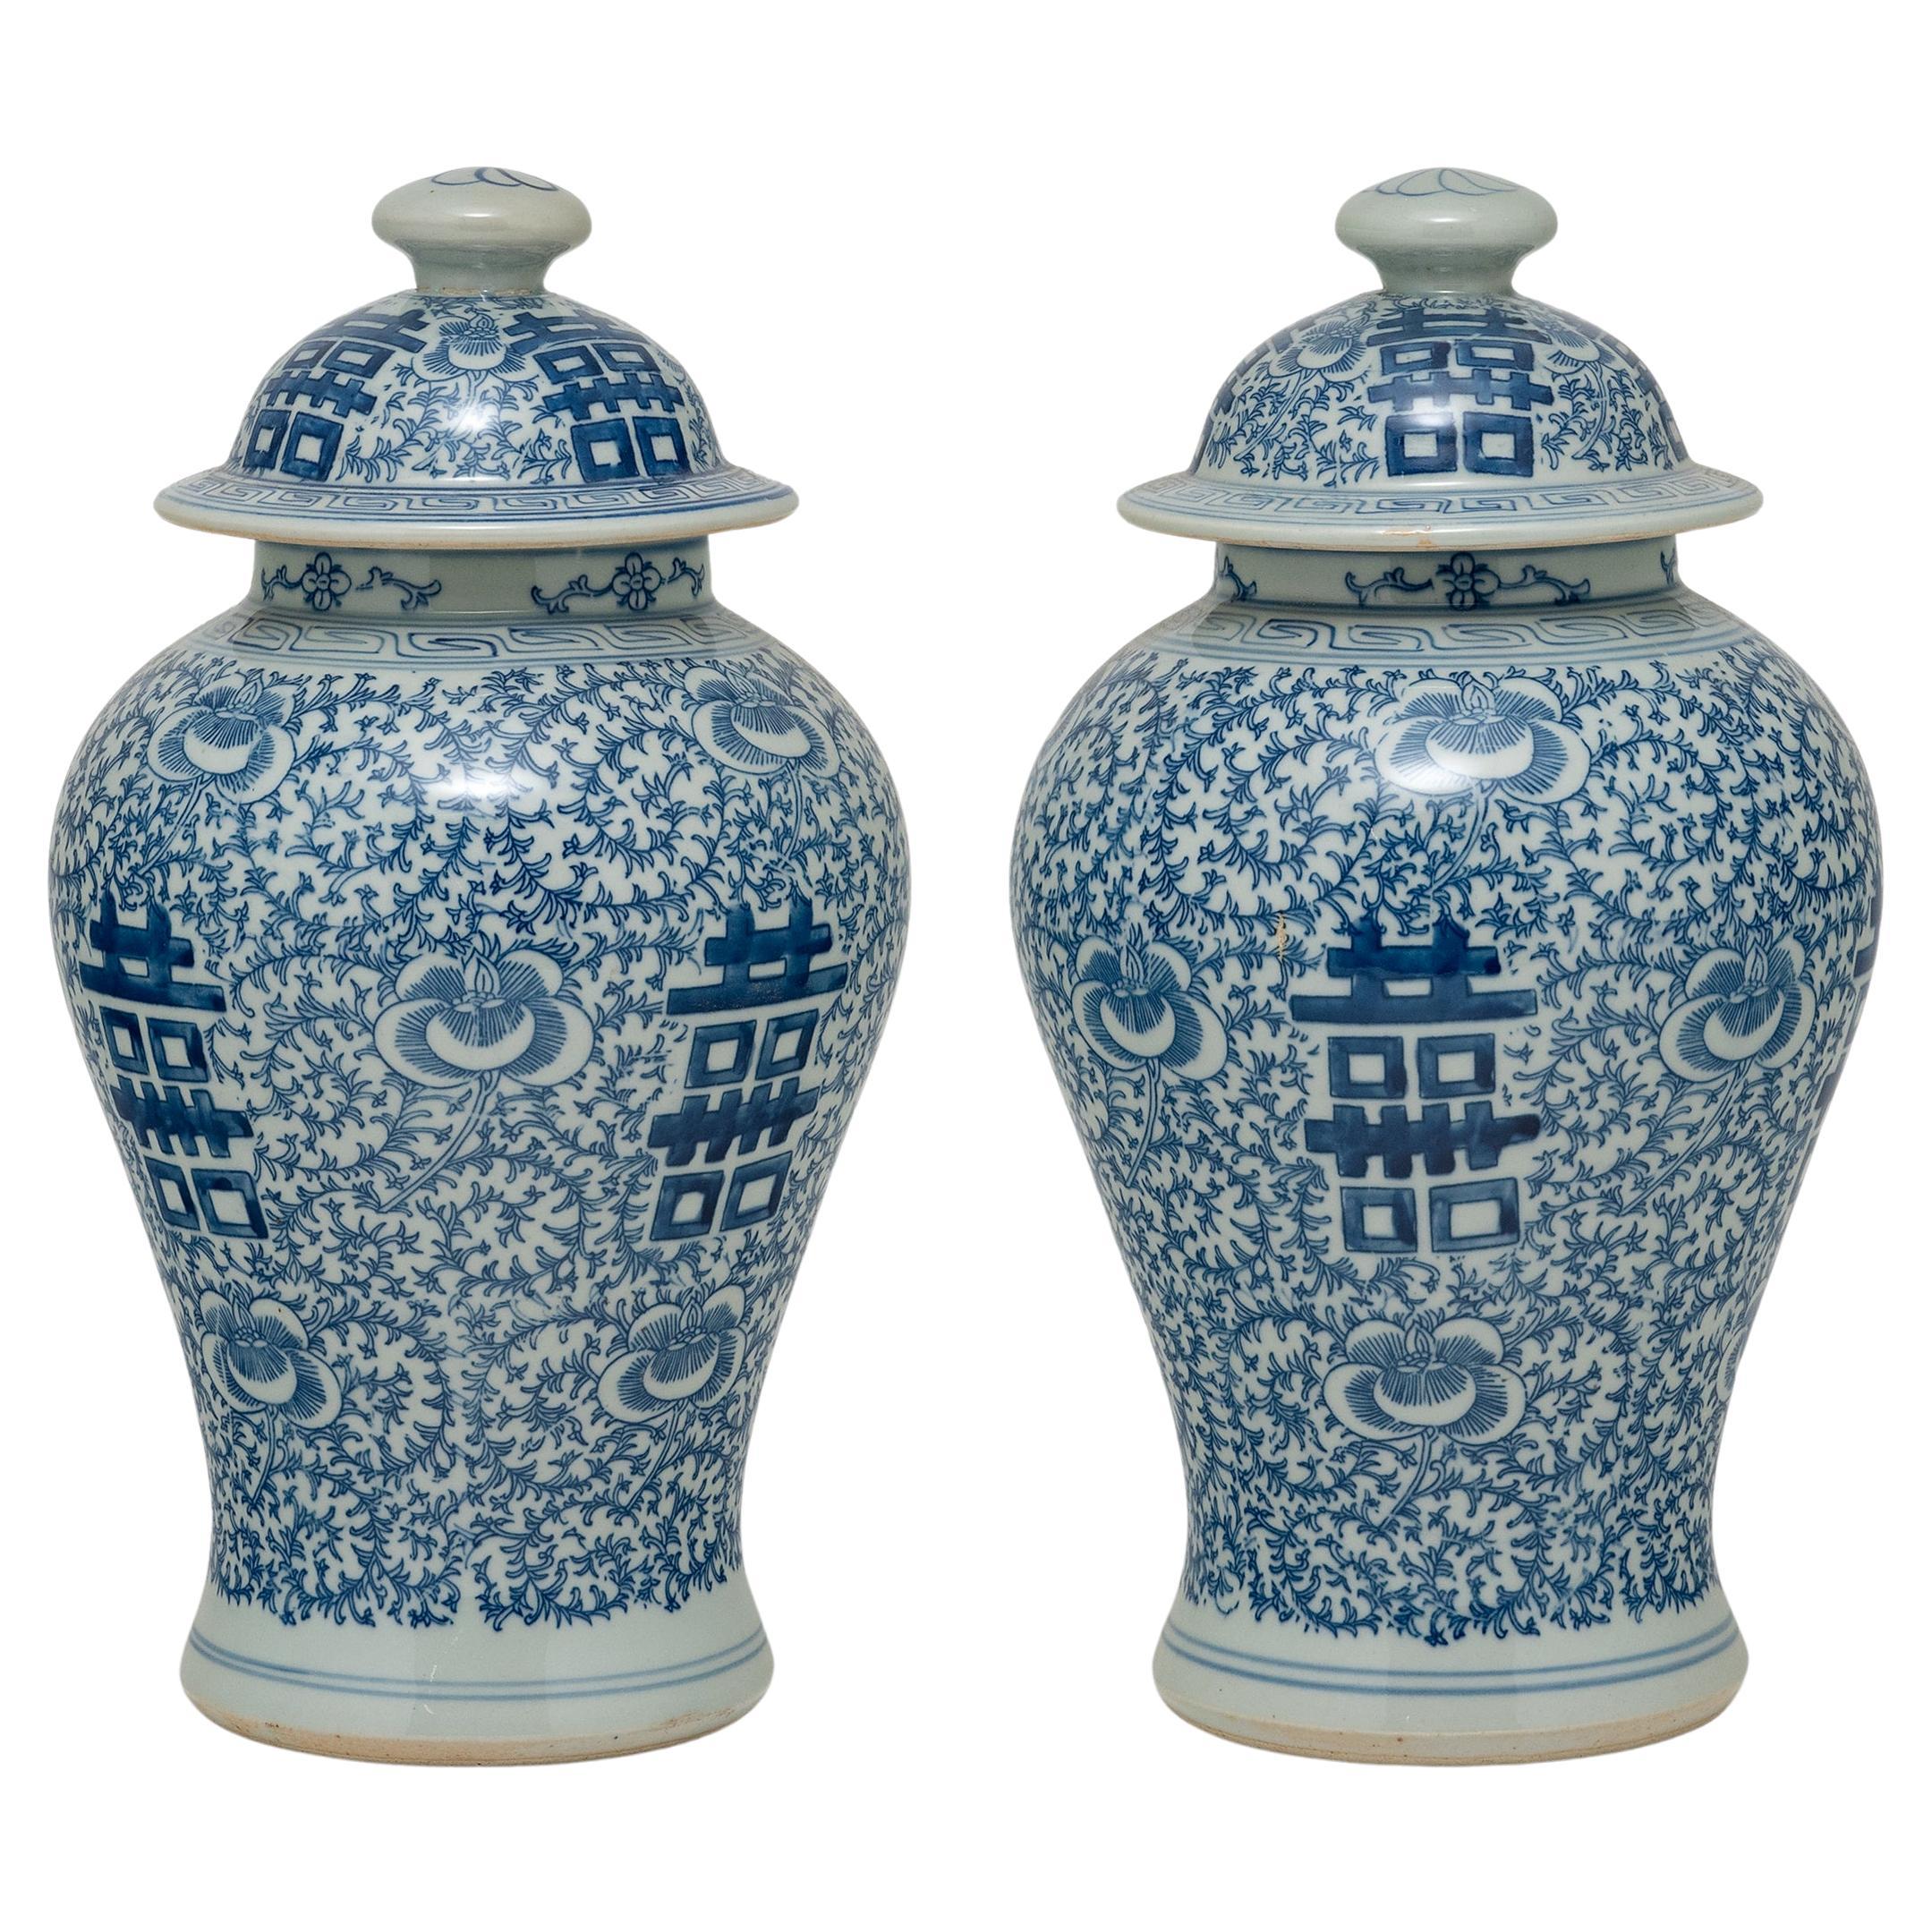 Pair of Blue and White Double Happiness Ginger Jars